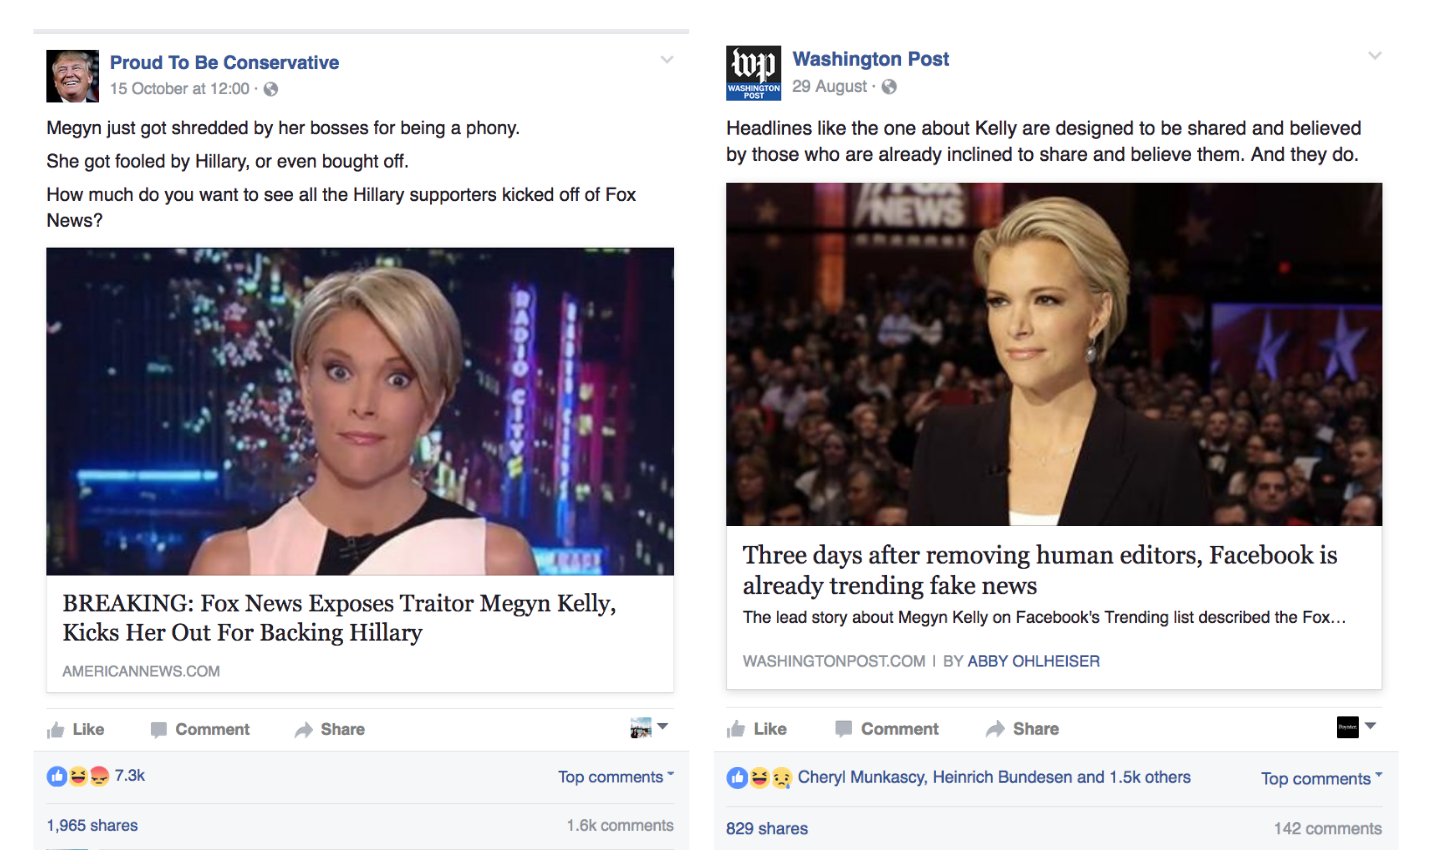 Compare and contrast. Fake post (left) does much better than earlier correction post (right)